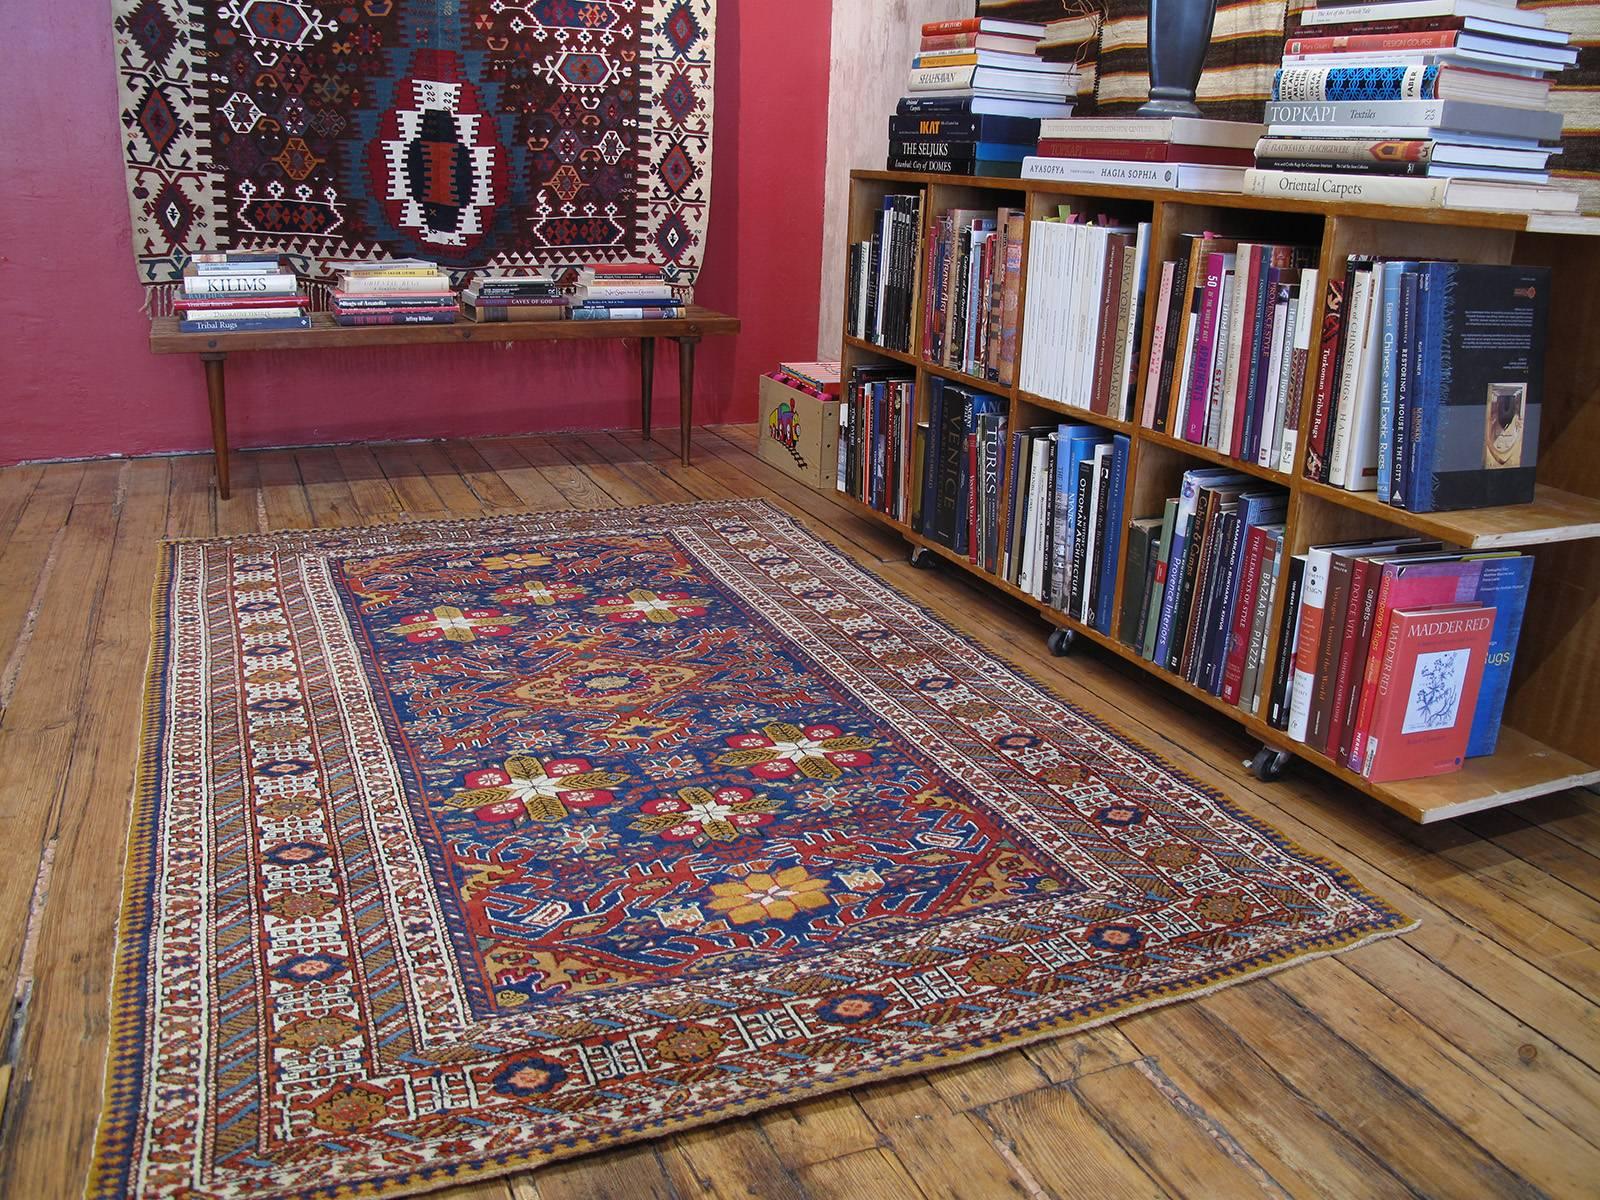 Daghestan or Shirvan rug. A beautiful old rug from the Eastern Caucasus (Azerbaijan), in a style attributed to the Shirvan region or possibly further north in Daghestan. Finely woven rug with excellent quality wool, with a unique composition in the